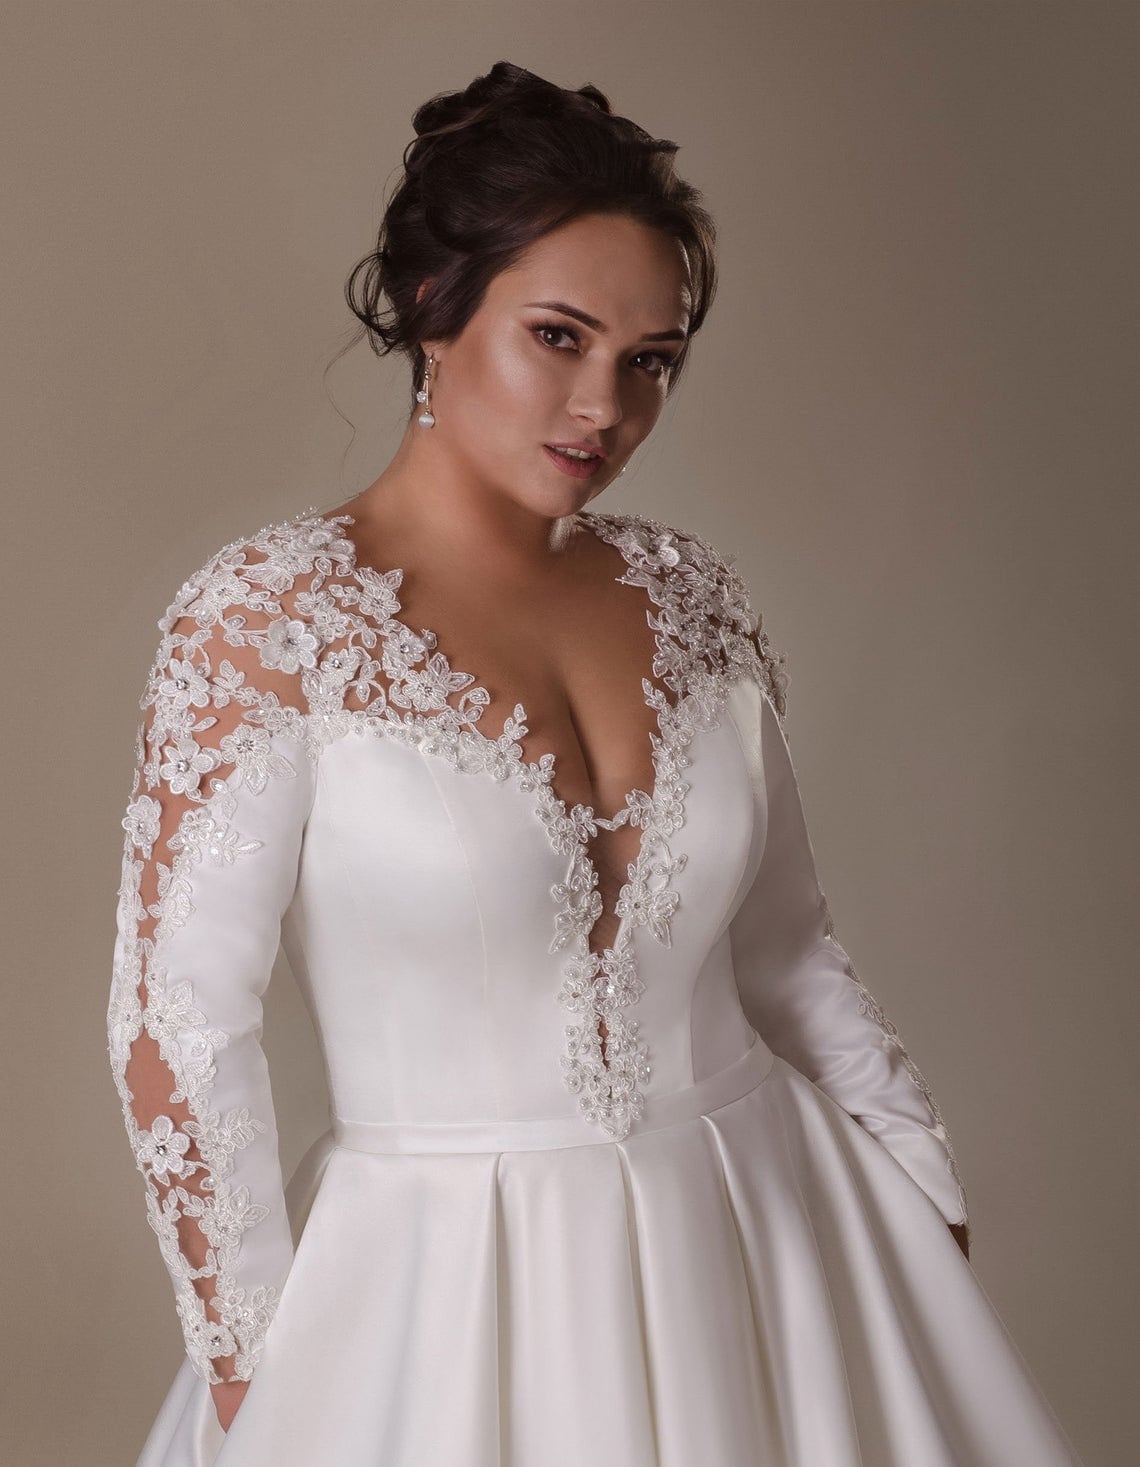 Plus Size Satin Wedding Dress With Lace Sleeves, A Line Satin Wedding  Dress, Classic Wedding Dress With Long Sleeves, ALL SIZES -  Canada